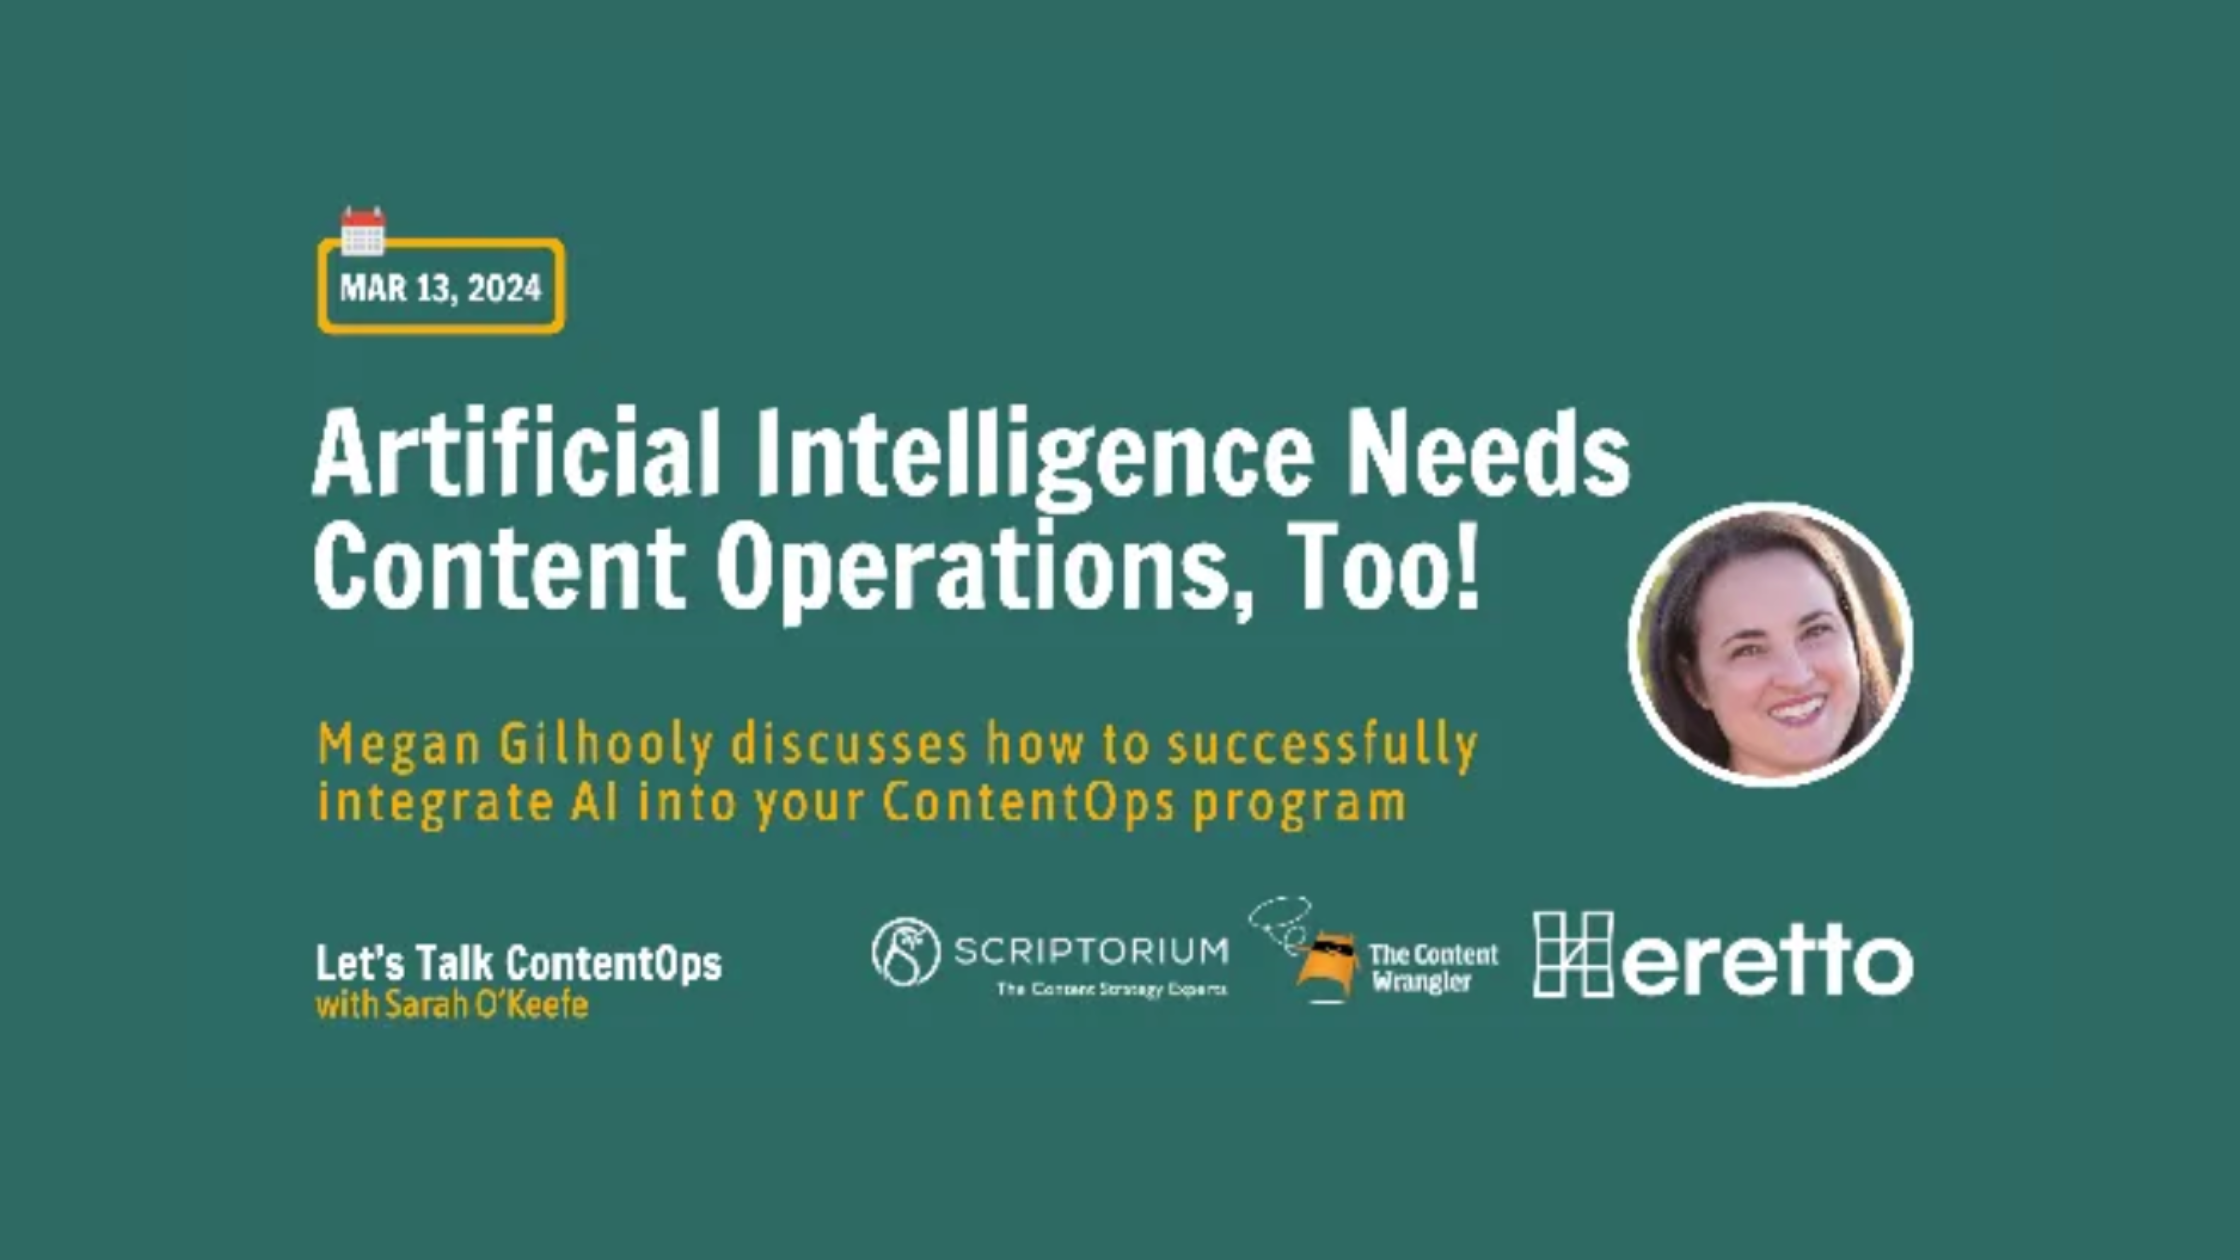 Green background with white text saying, "Artificial Intelligence Needs Content Operations, Too!" with Megan Gilhooly